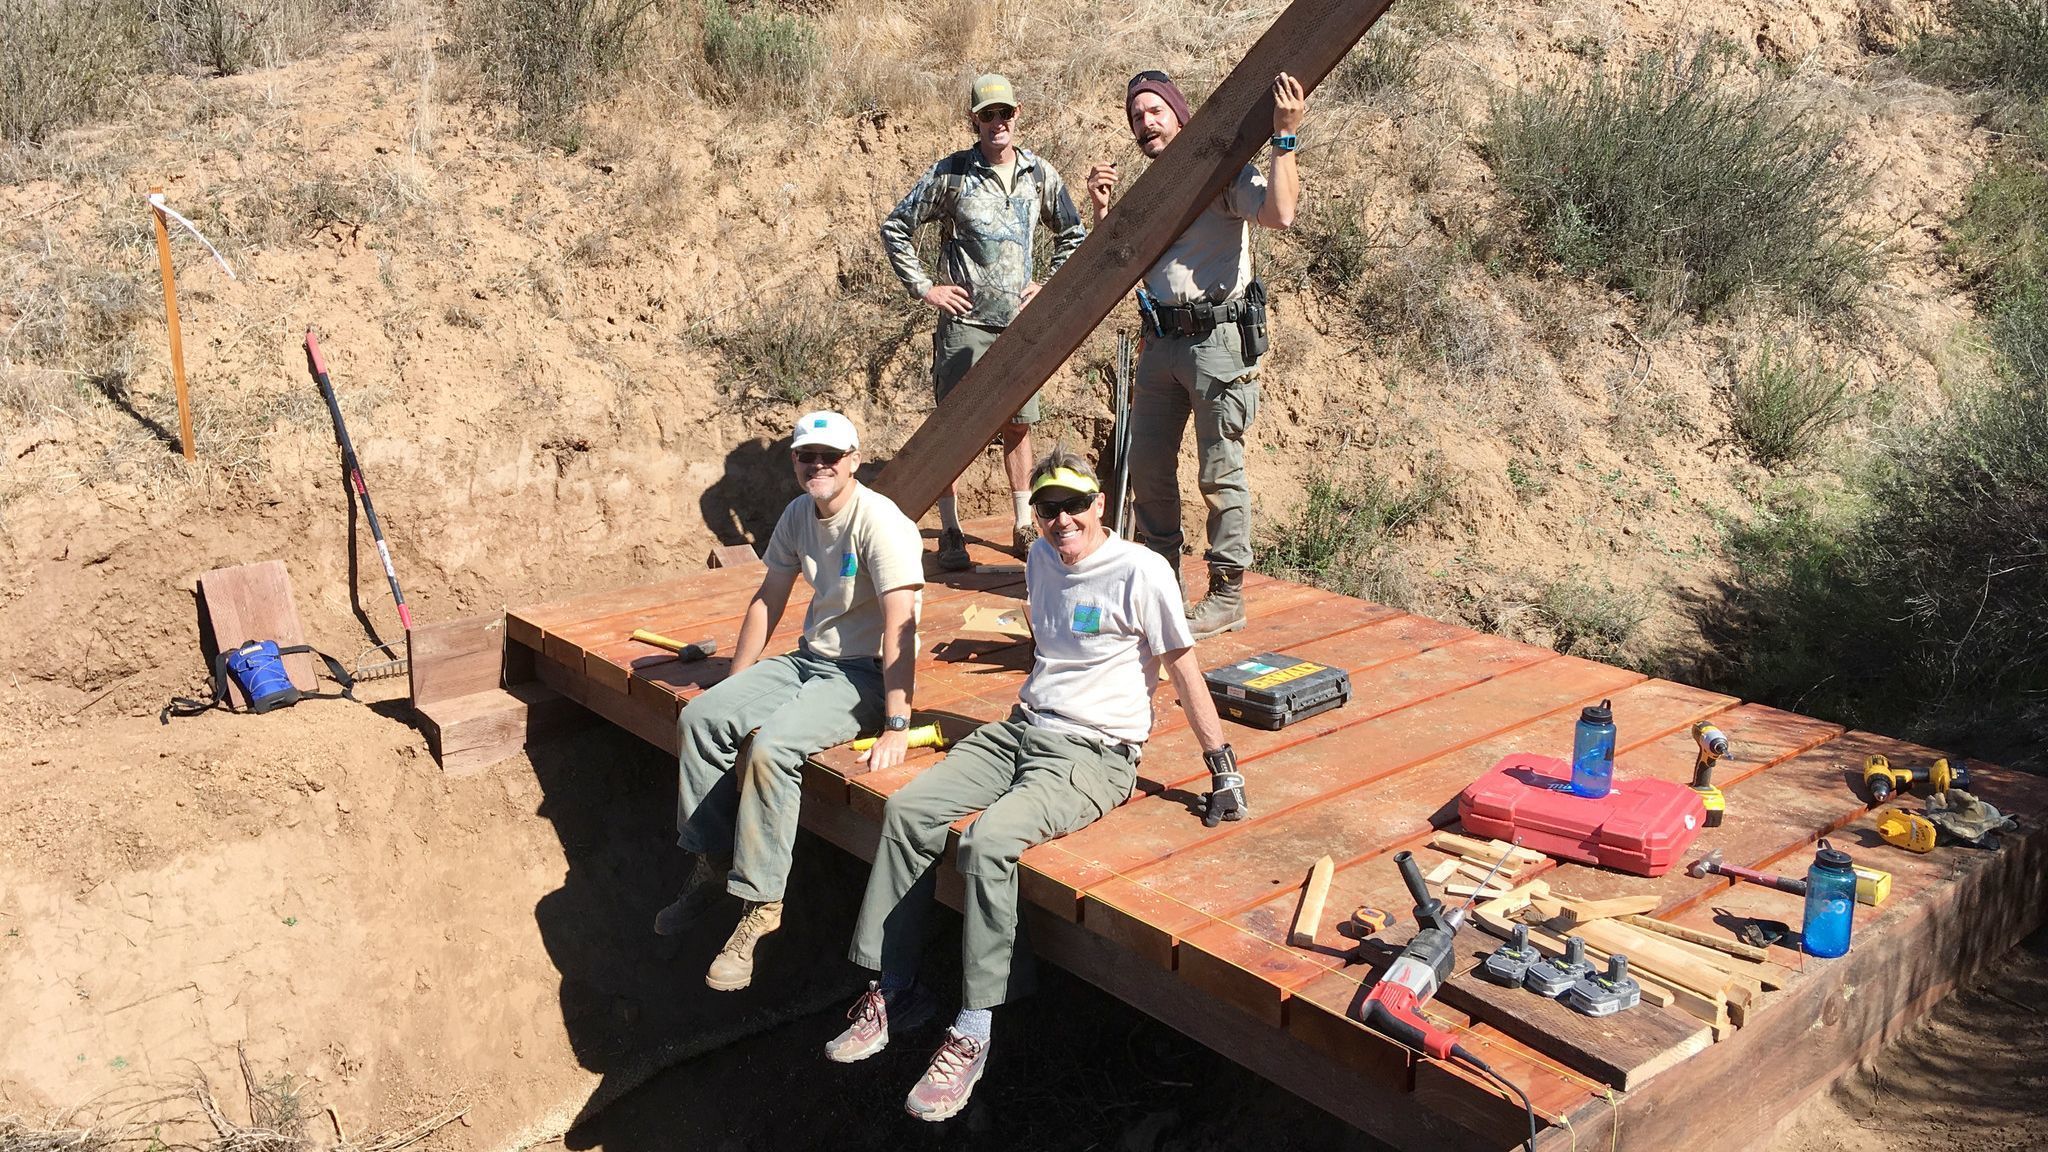 Trails crew are, standing from left, San Dieguito River Park Rangers David Hekel and Felipe Franco-Ortiz, and, sitting from left, volunteers Jack Bochsler and Bernie Bonar.